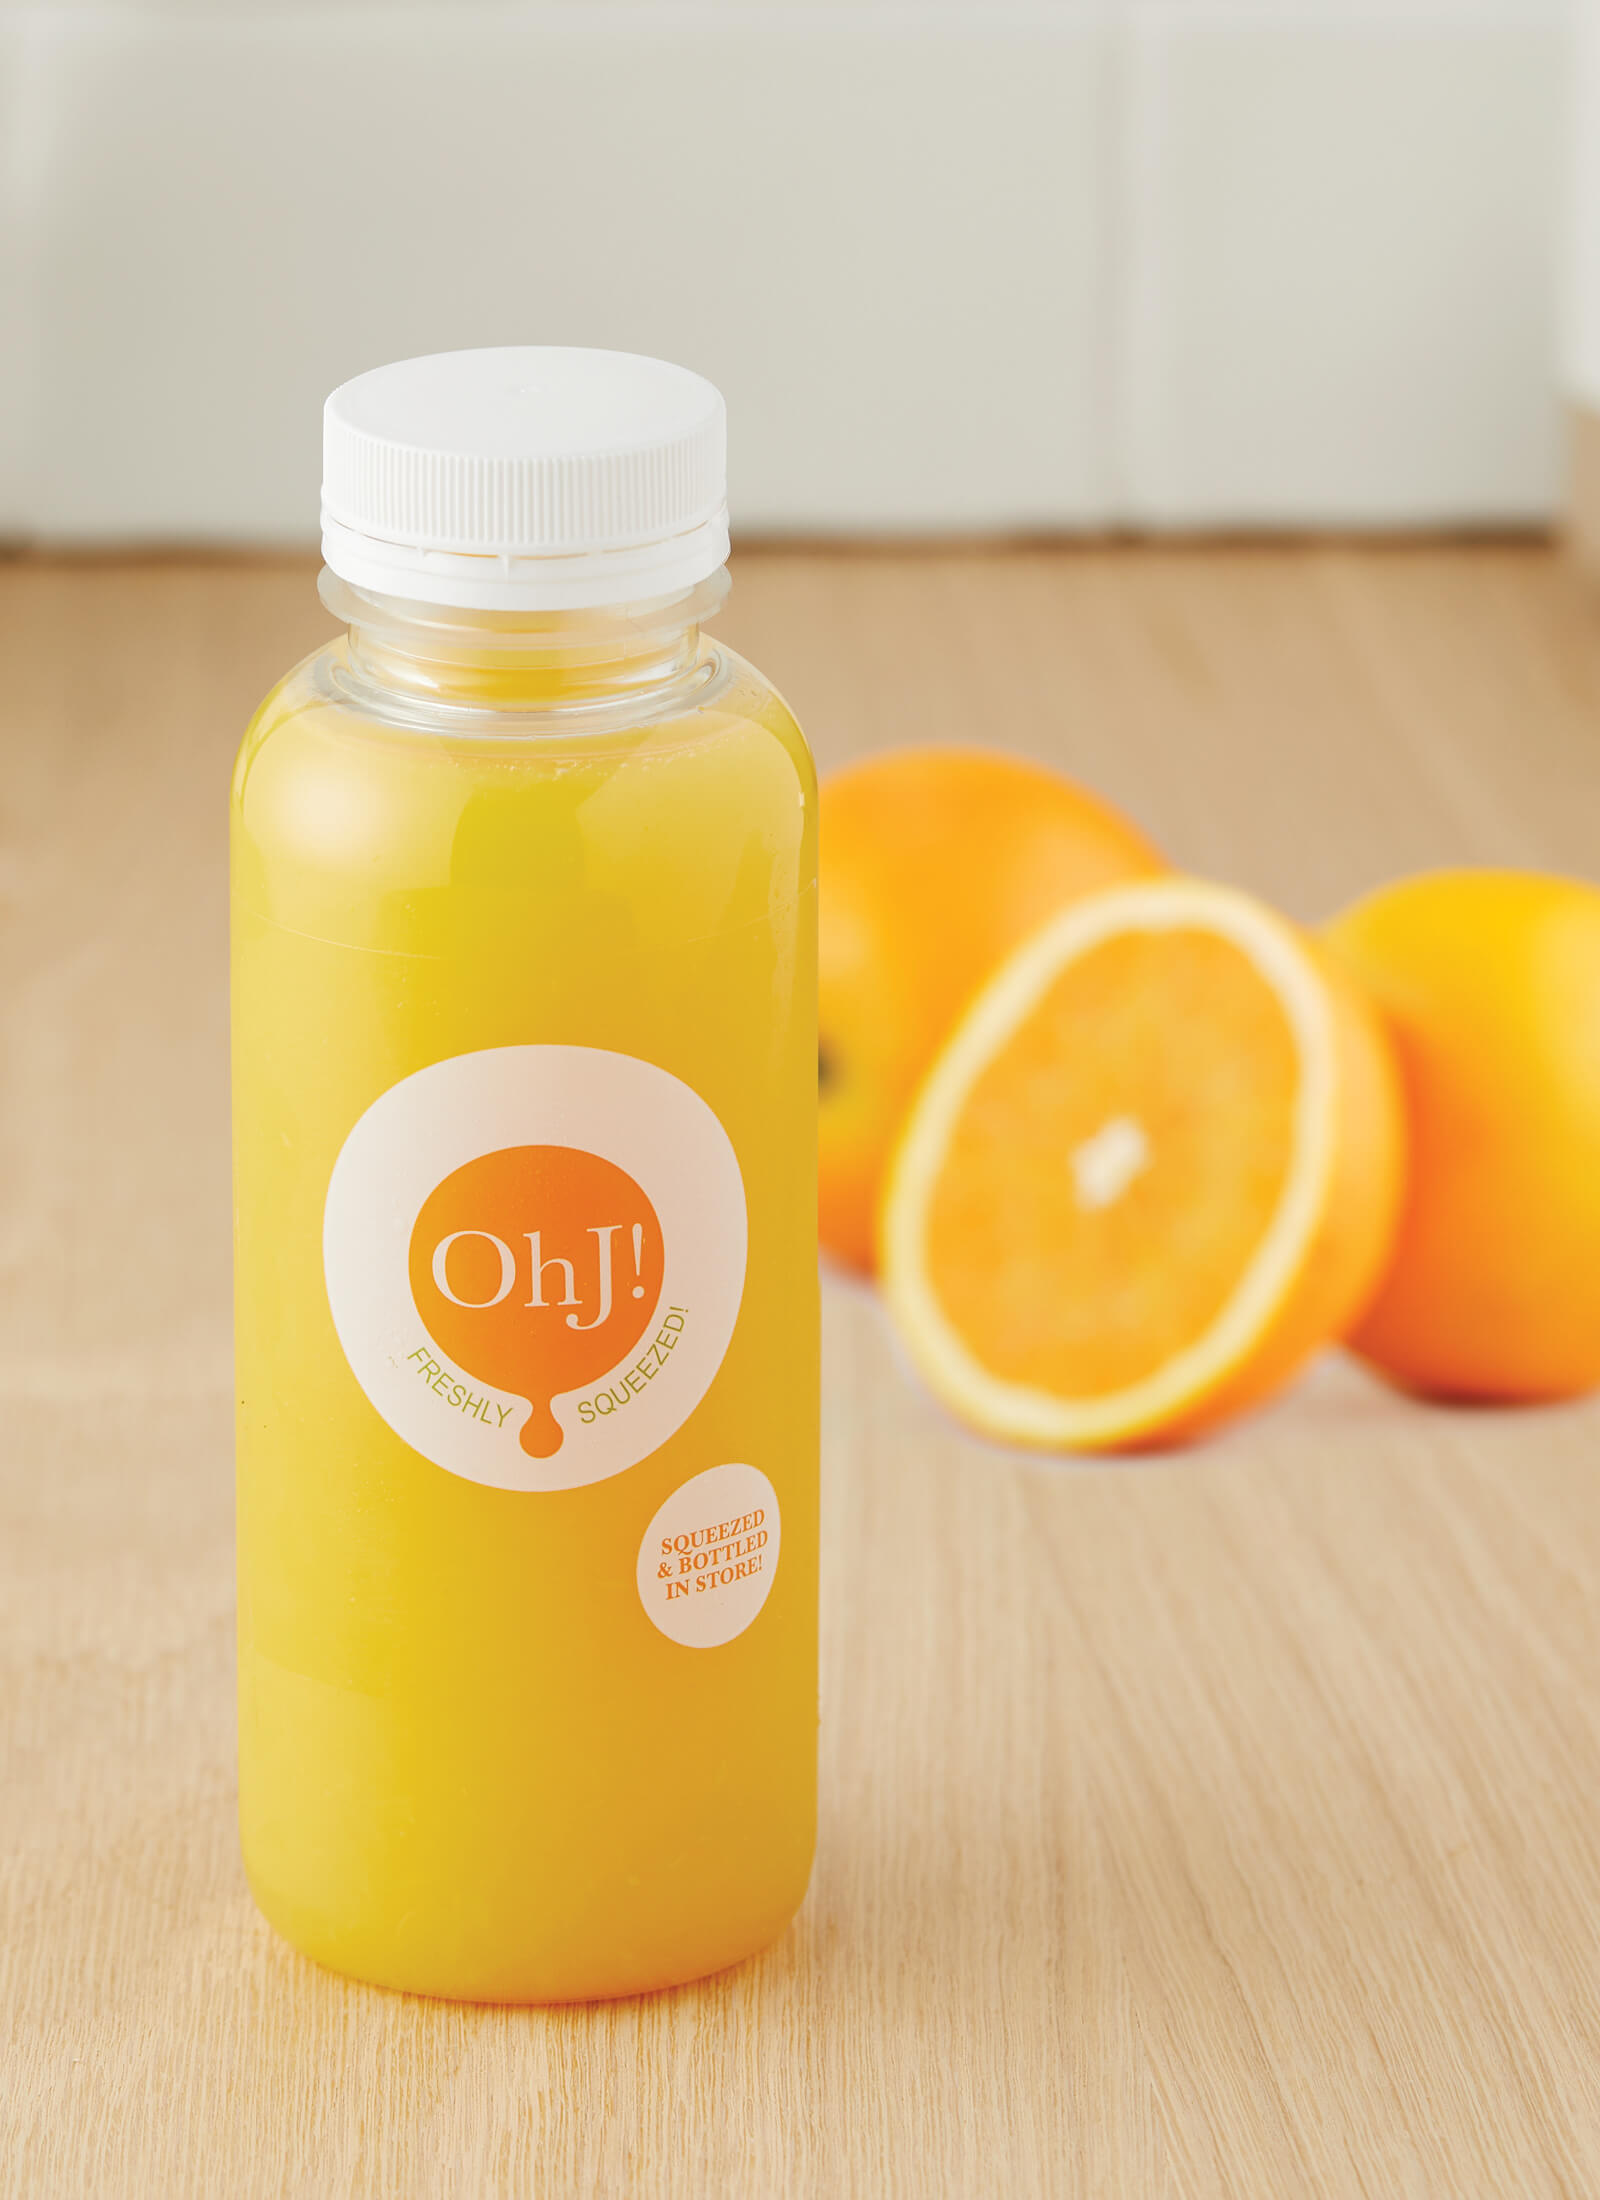 OhJ! - freshly squeezed orange juice with no added sugar or preservatives